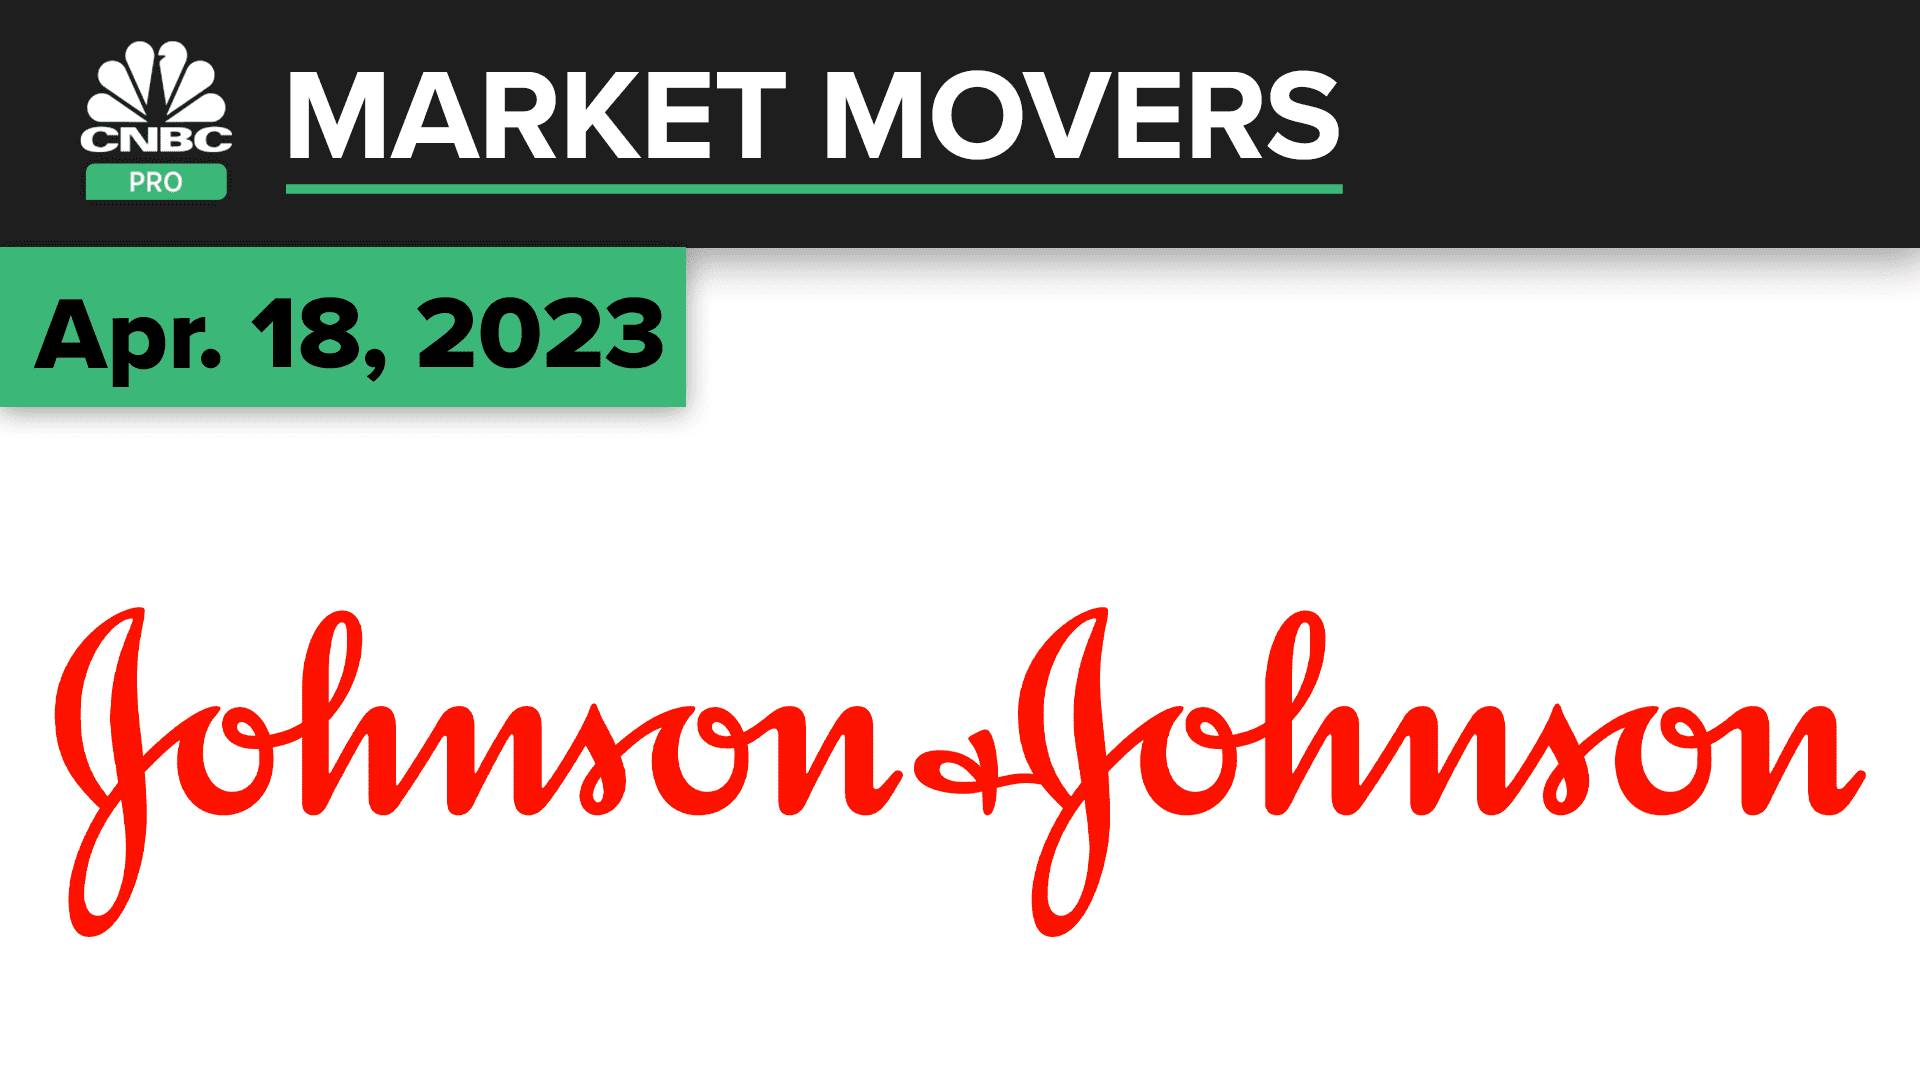 Why the pros say there's still a lot of upside to Johnson & Johnson after earnings beat